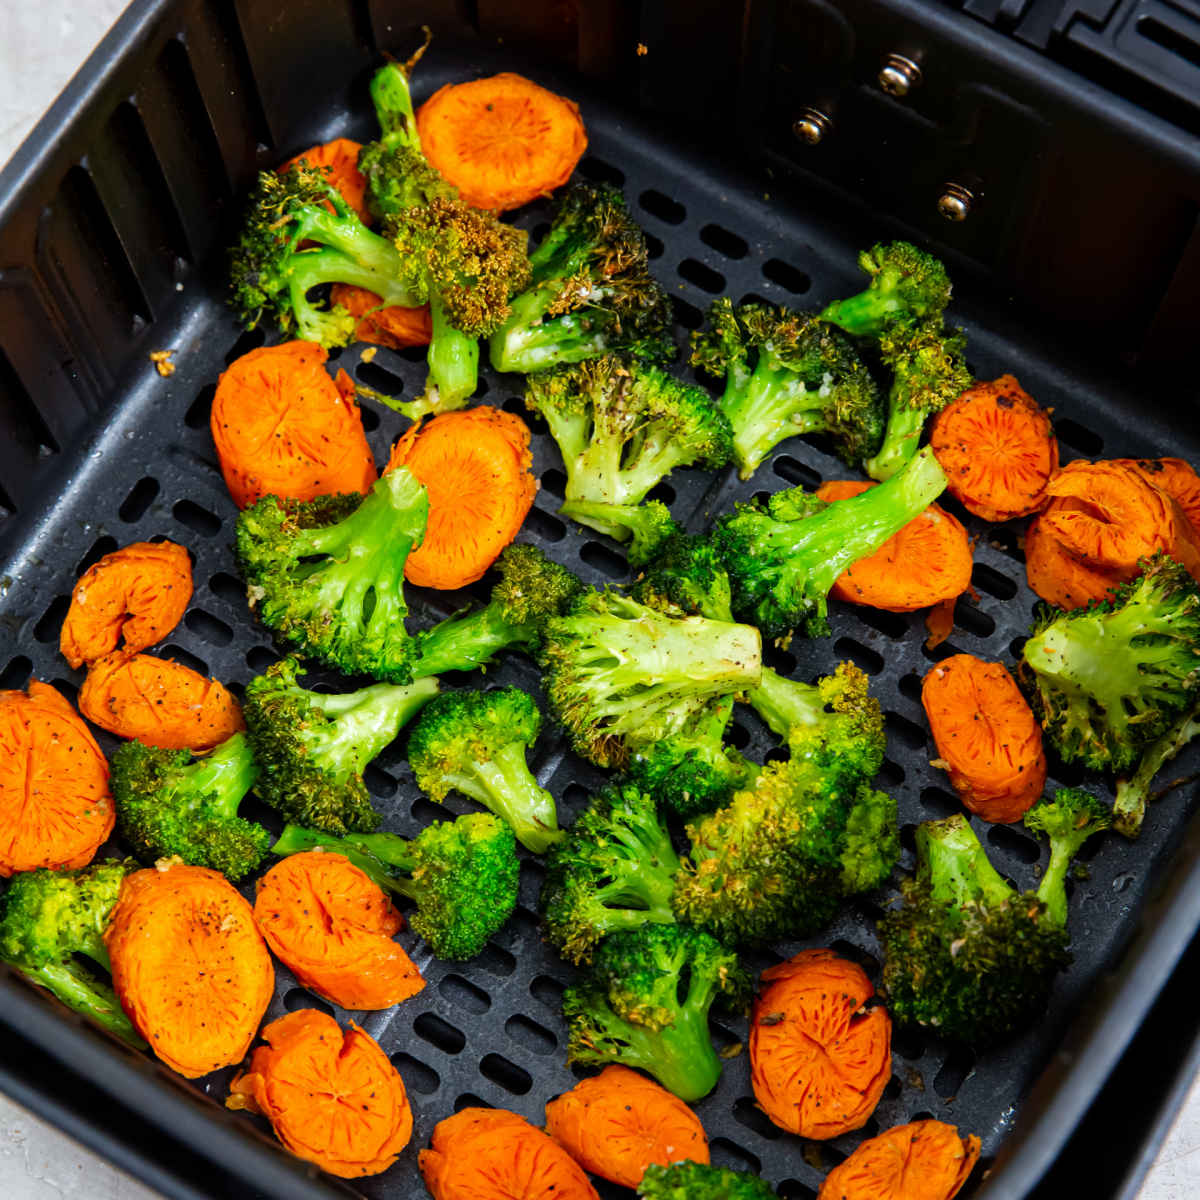 Broccoli and carrots in the basket of the air fryer.